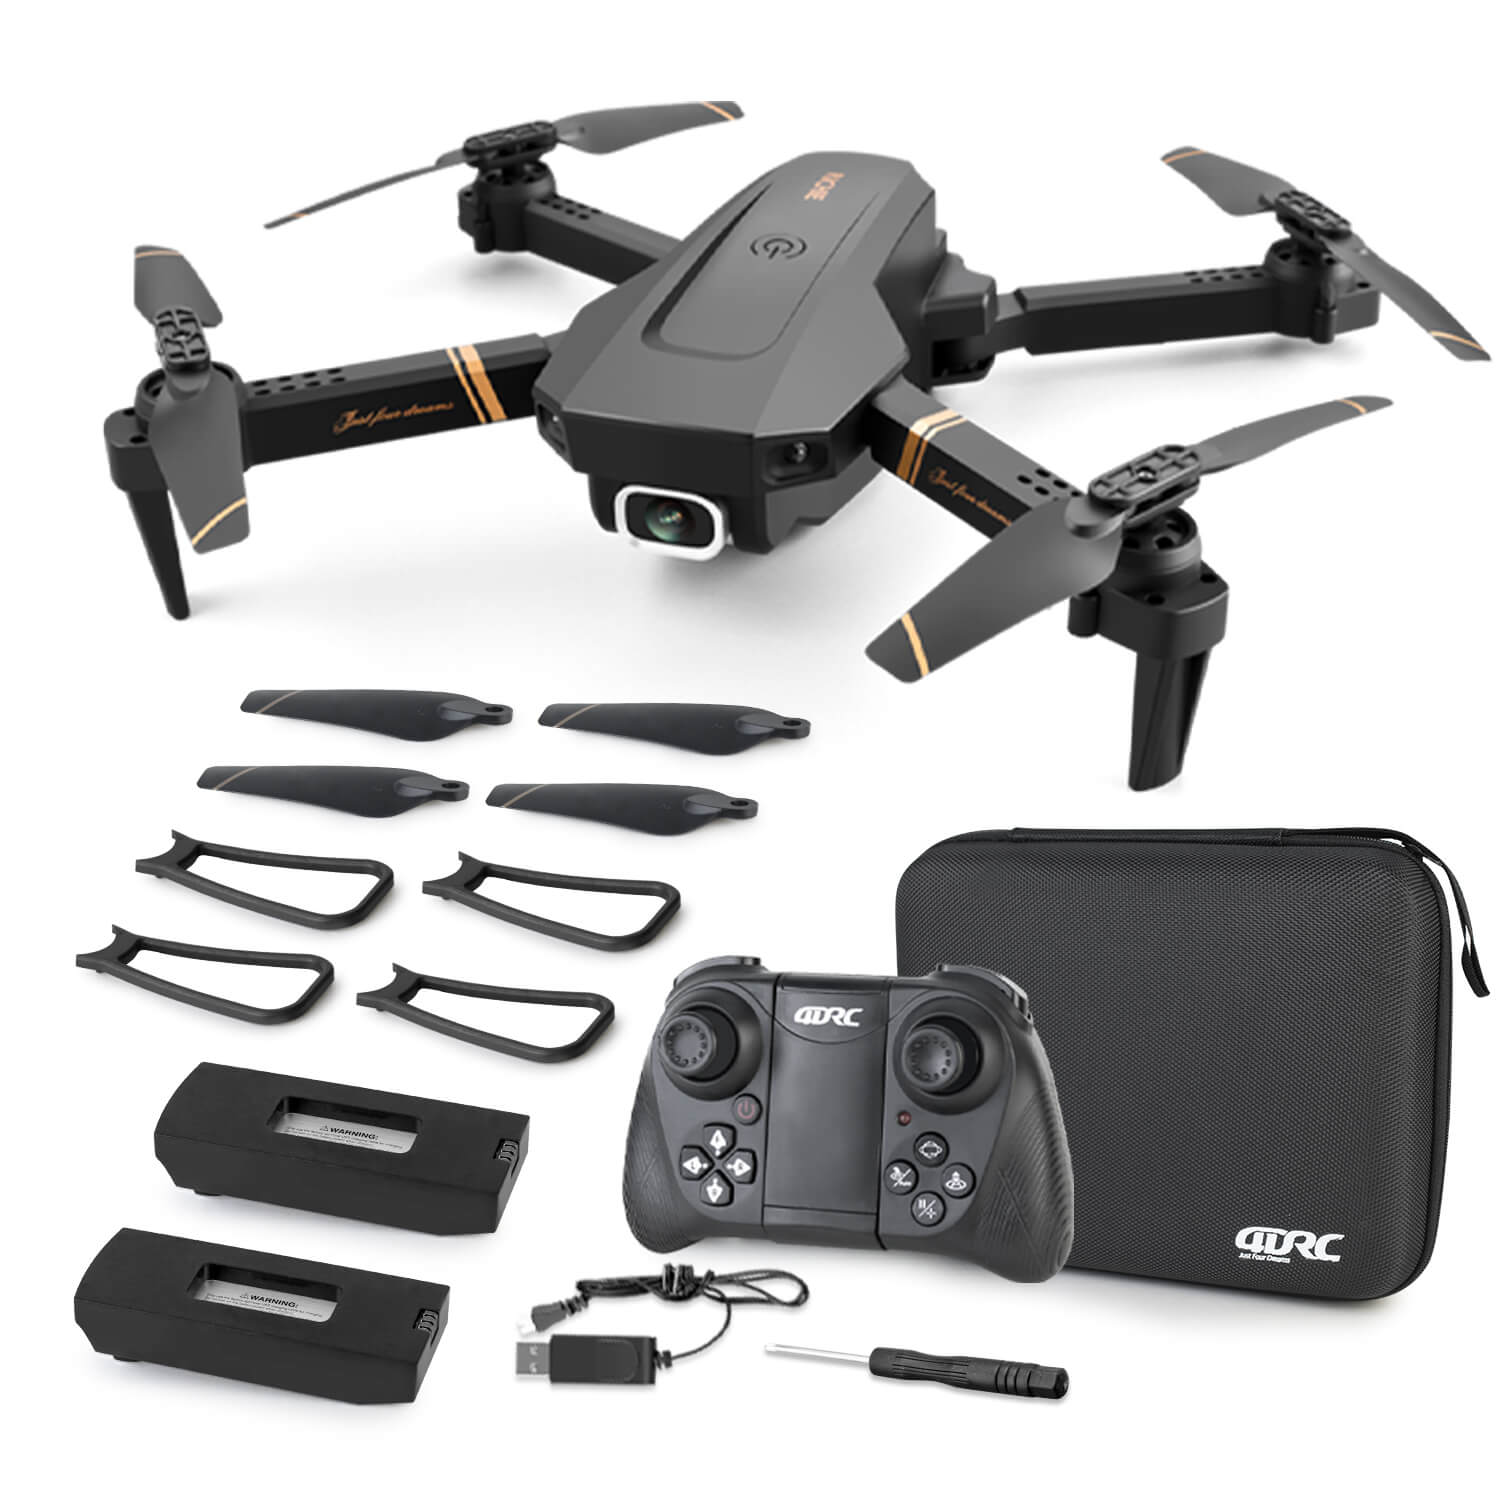 Inspectie Wordt erger Transistor 4DRC Richie V4 Drone with 1080P camera for adults beginner